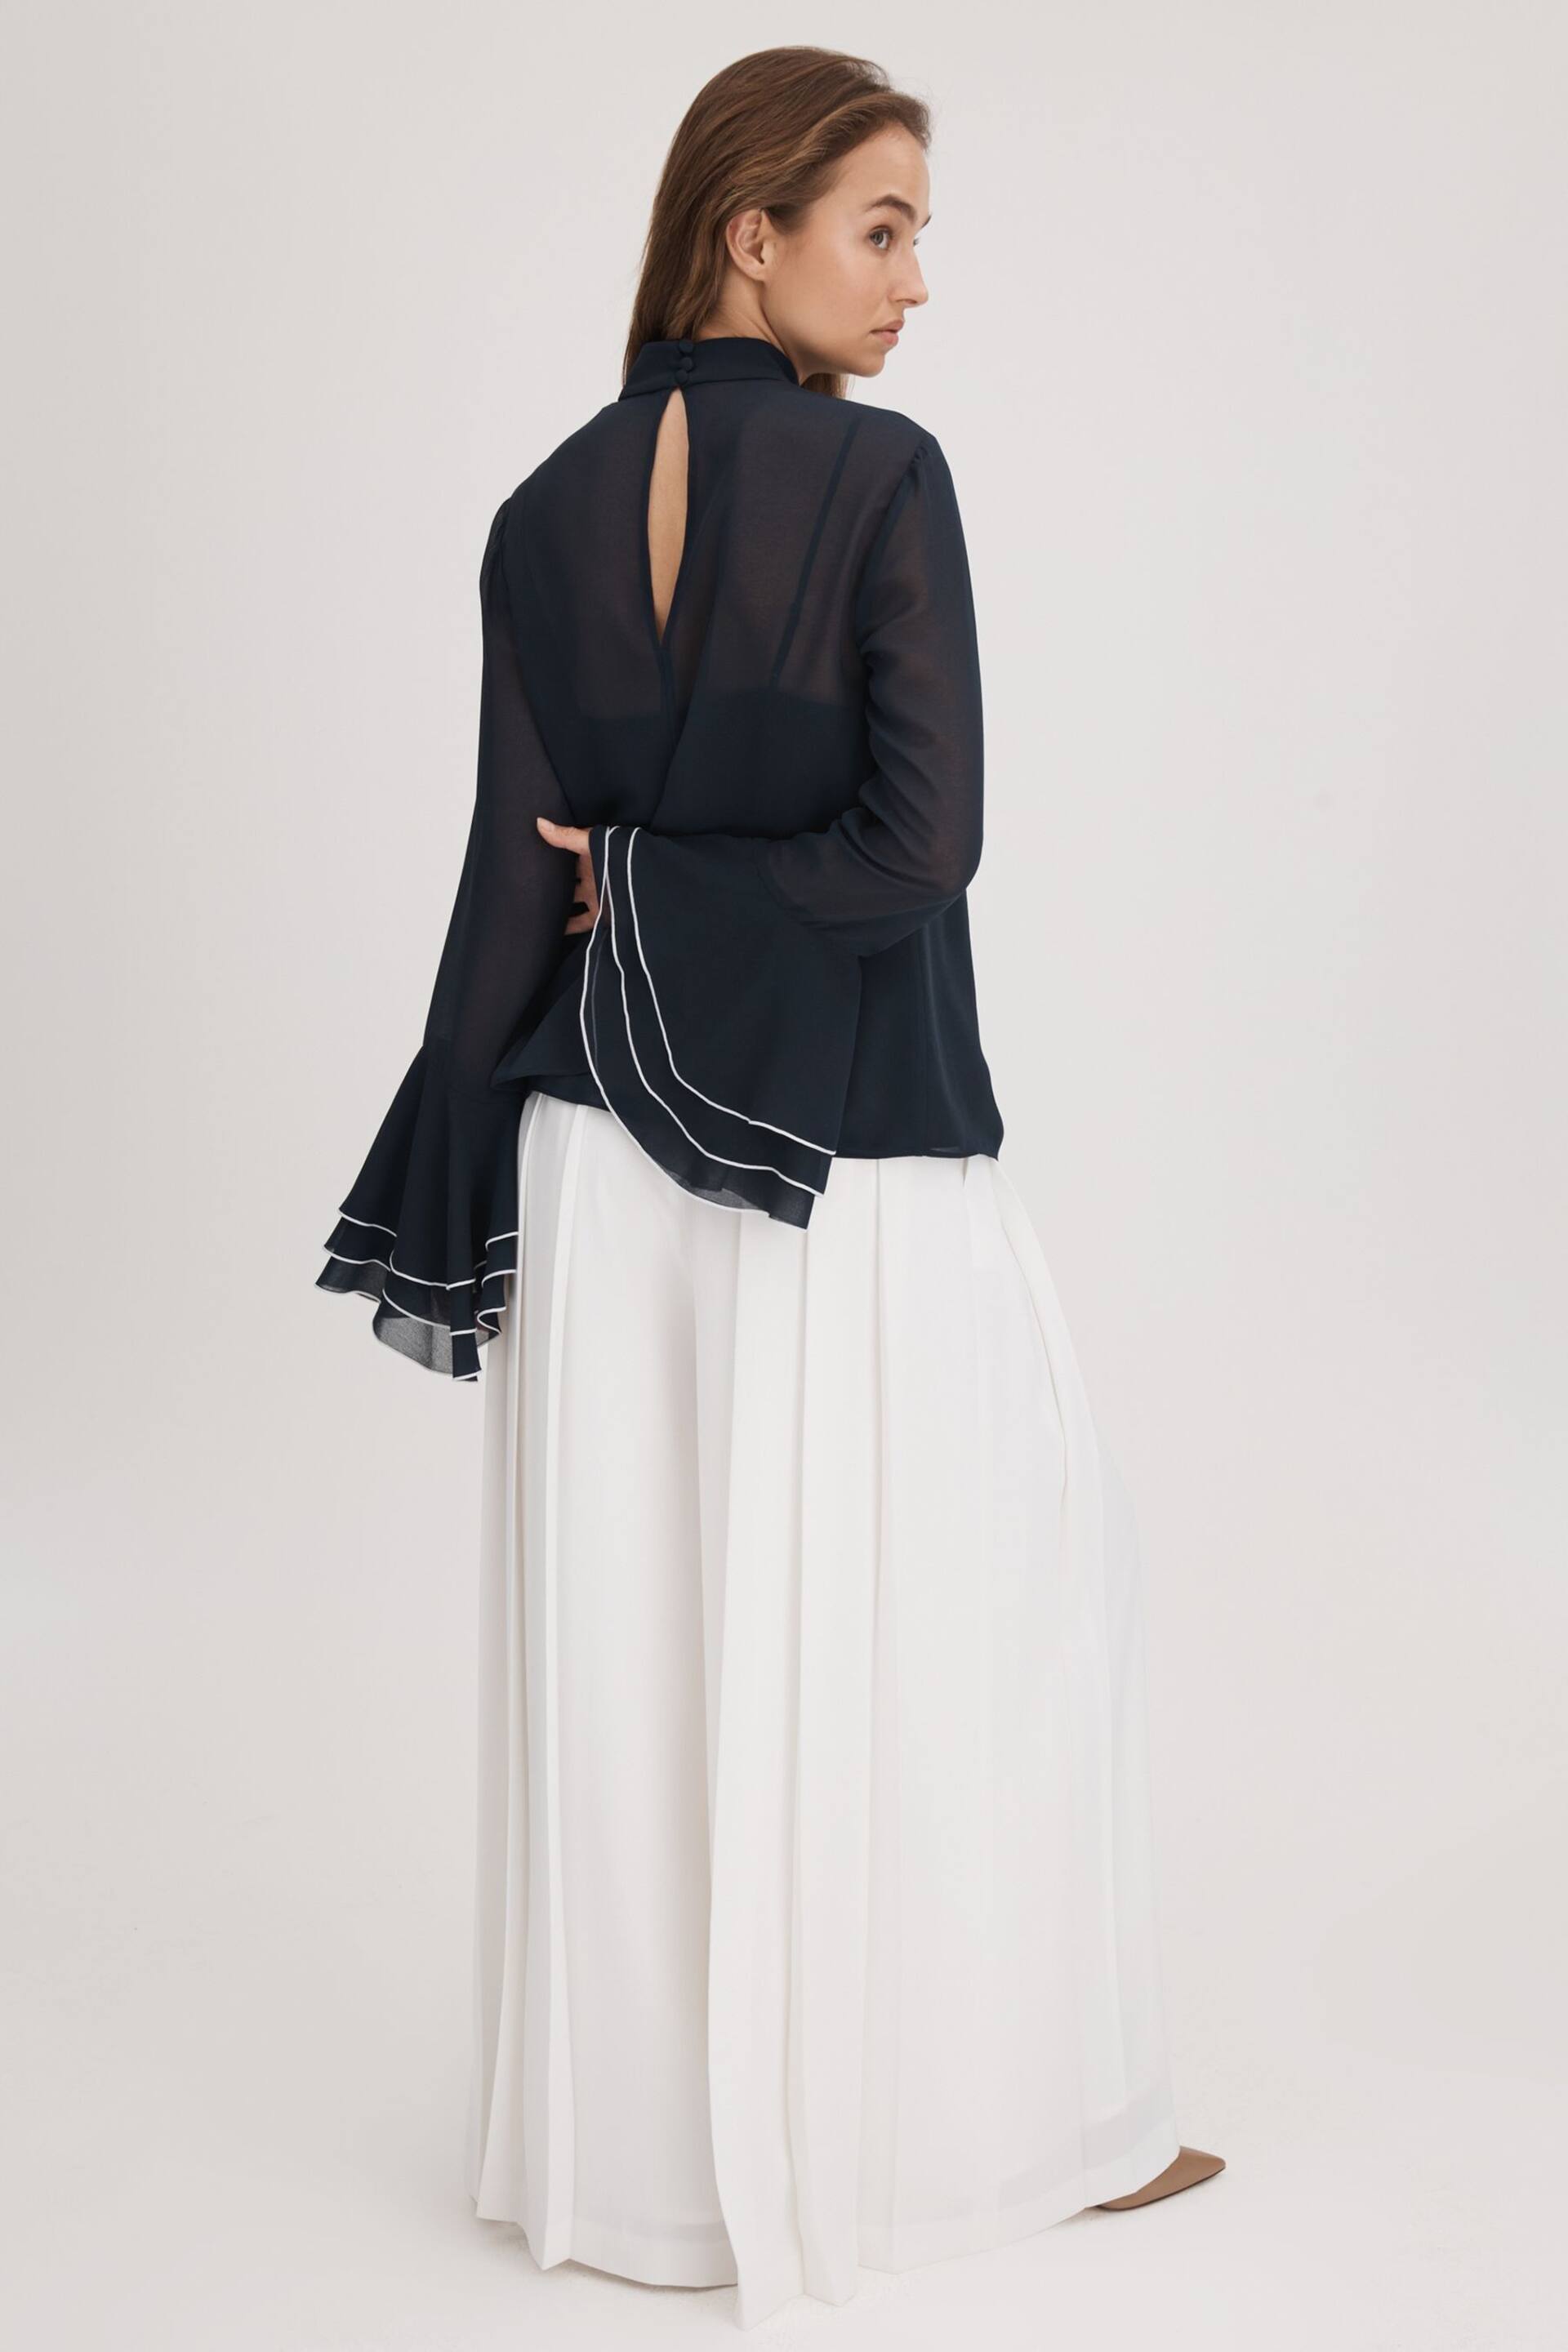 Florere Fluted Cuff Blouse - Image 6 of 7